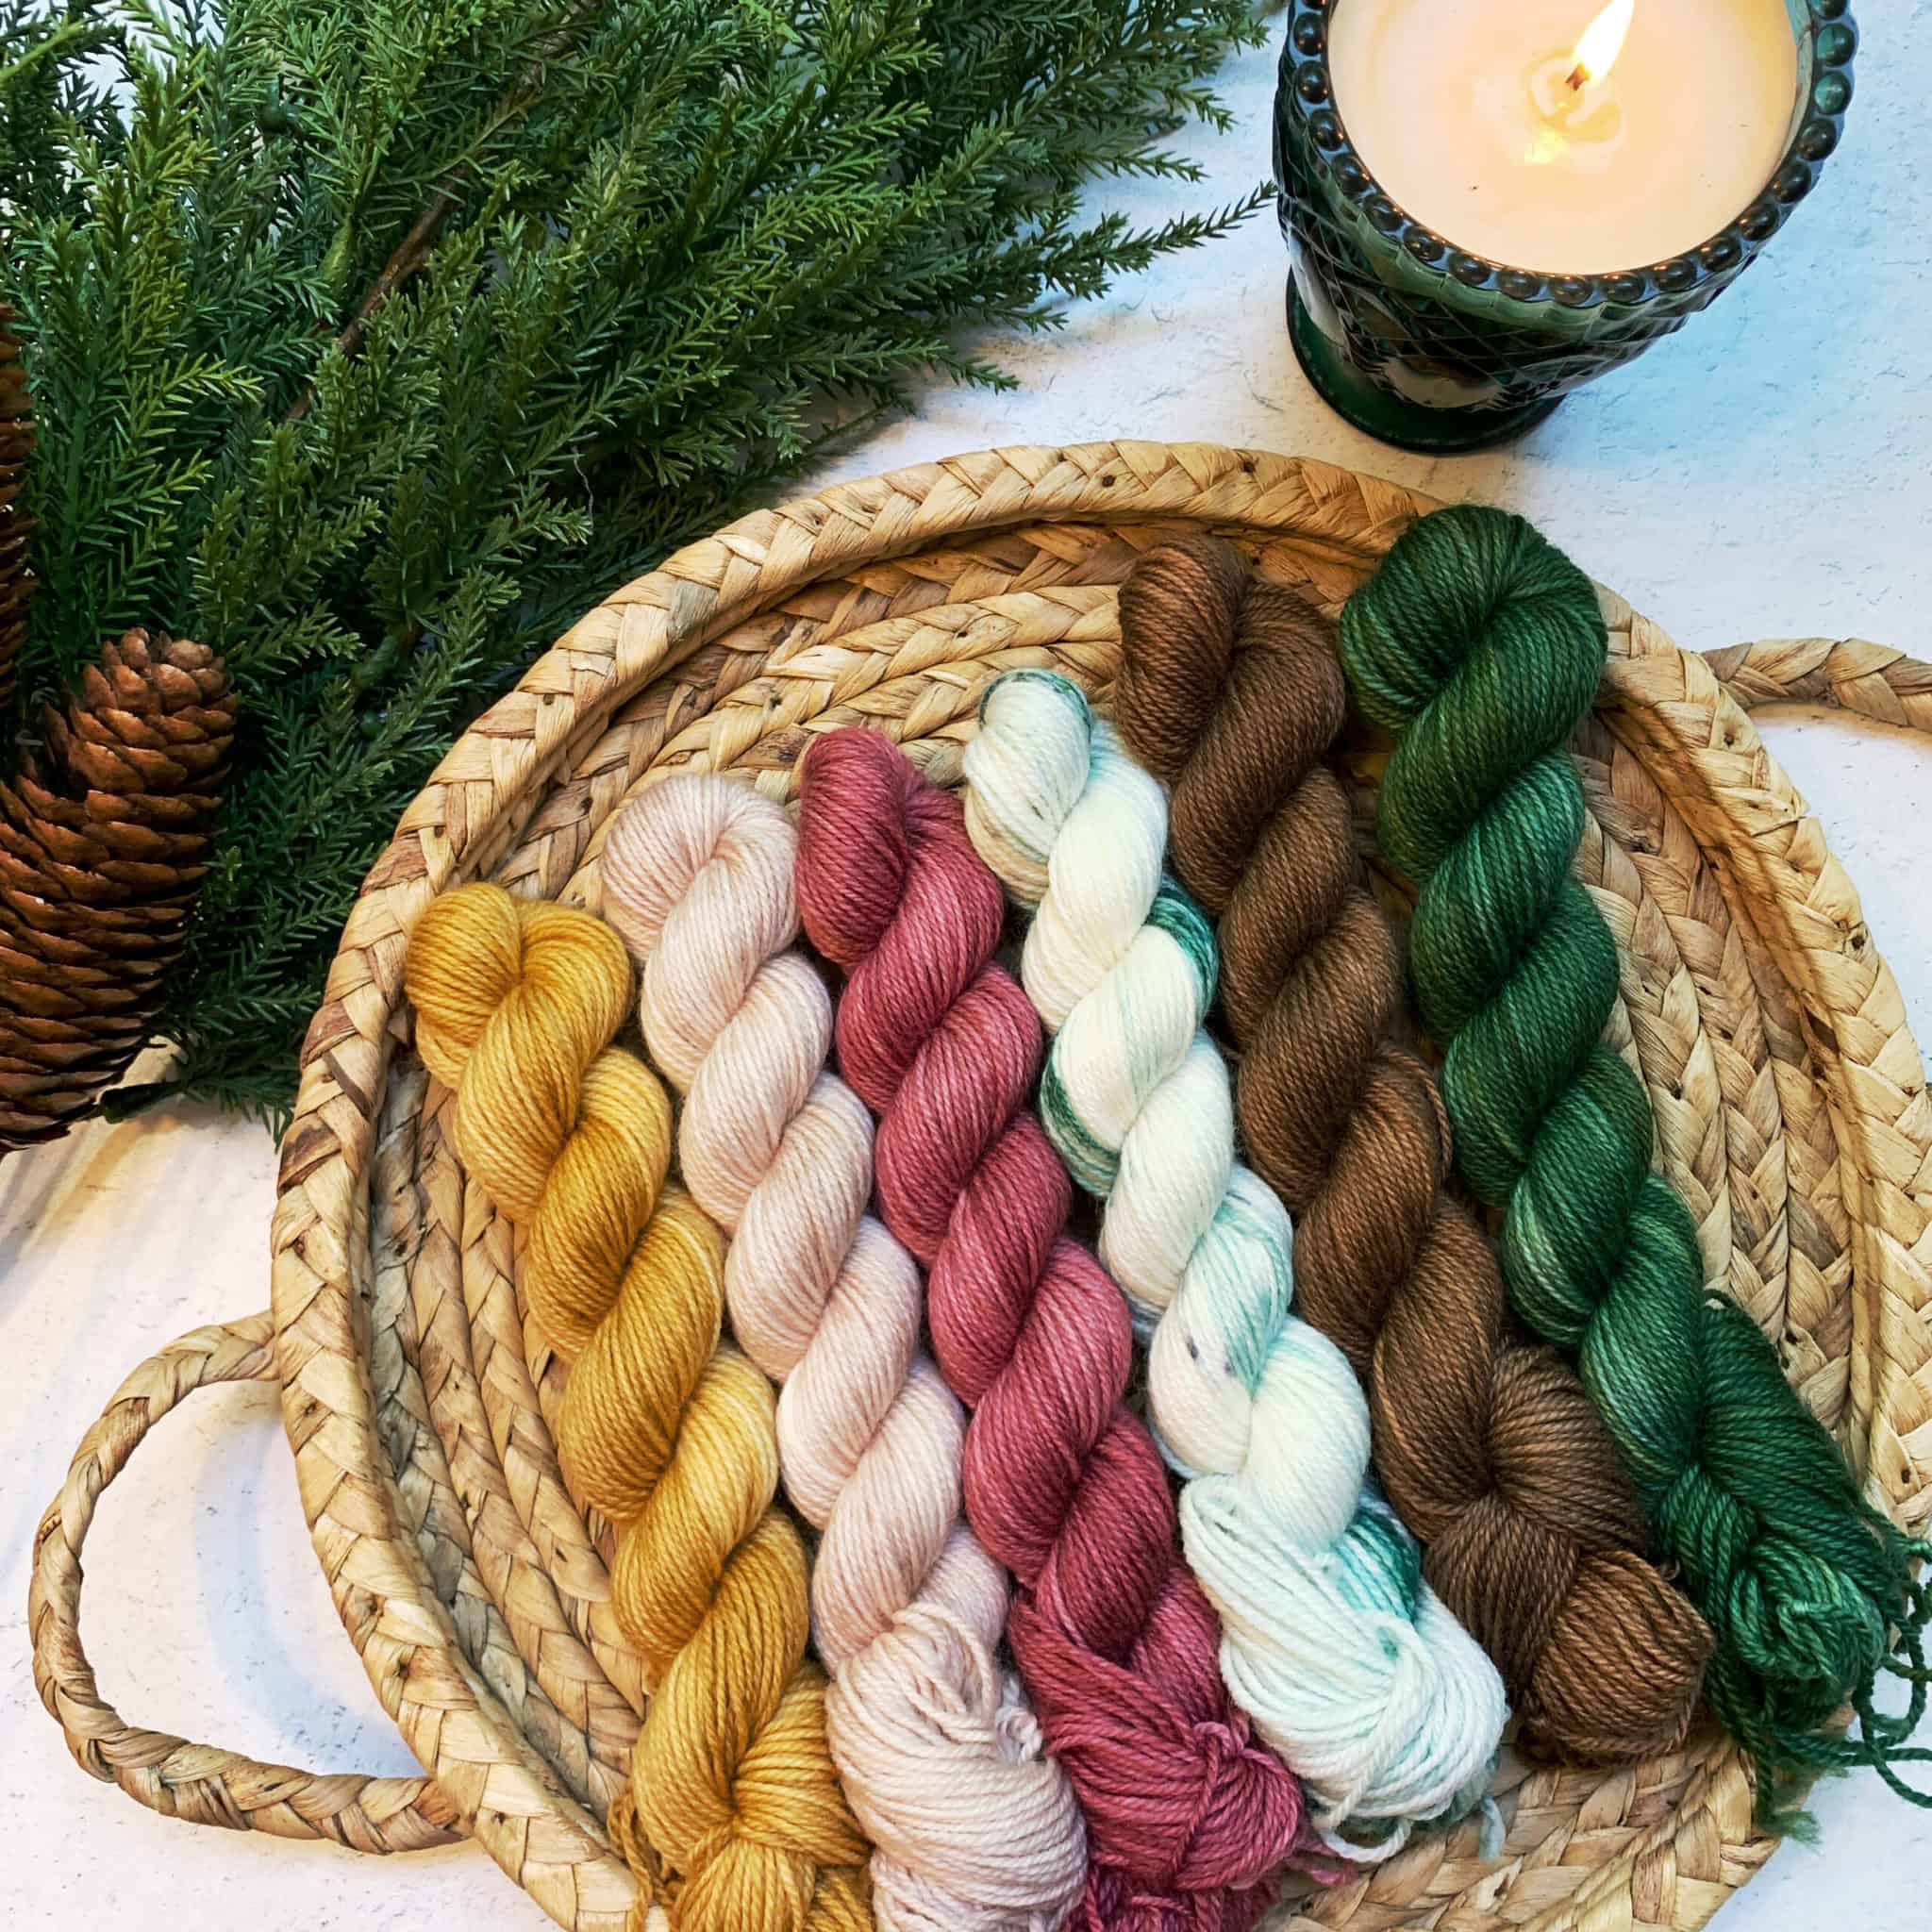 Gold, pink, red, white, brown and green yarn in a flat basket.